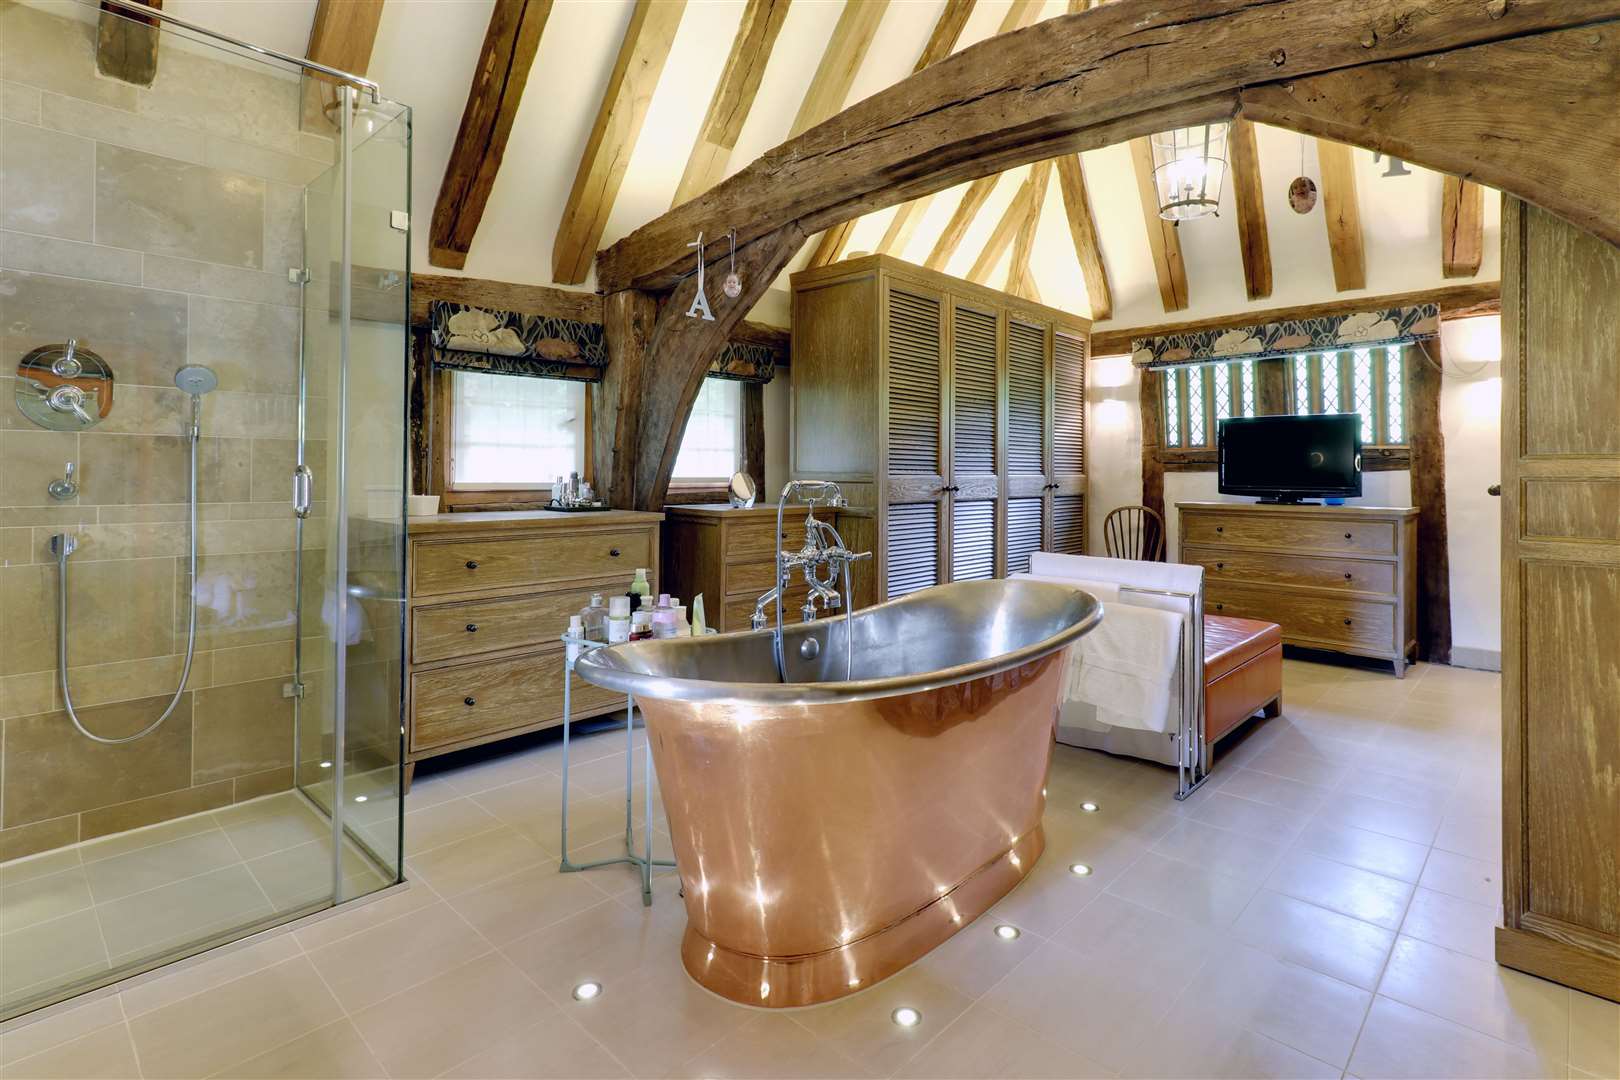 Spend a relaxing evening in the beautiful freestanding bath. Picture: Savills